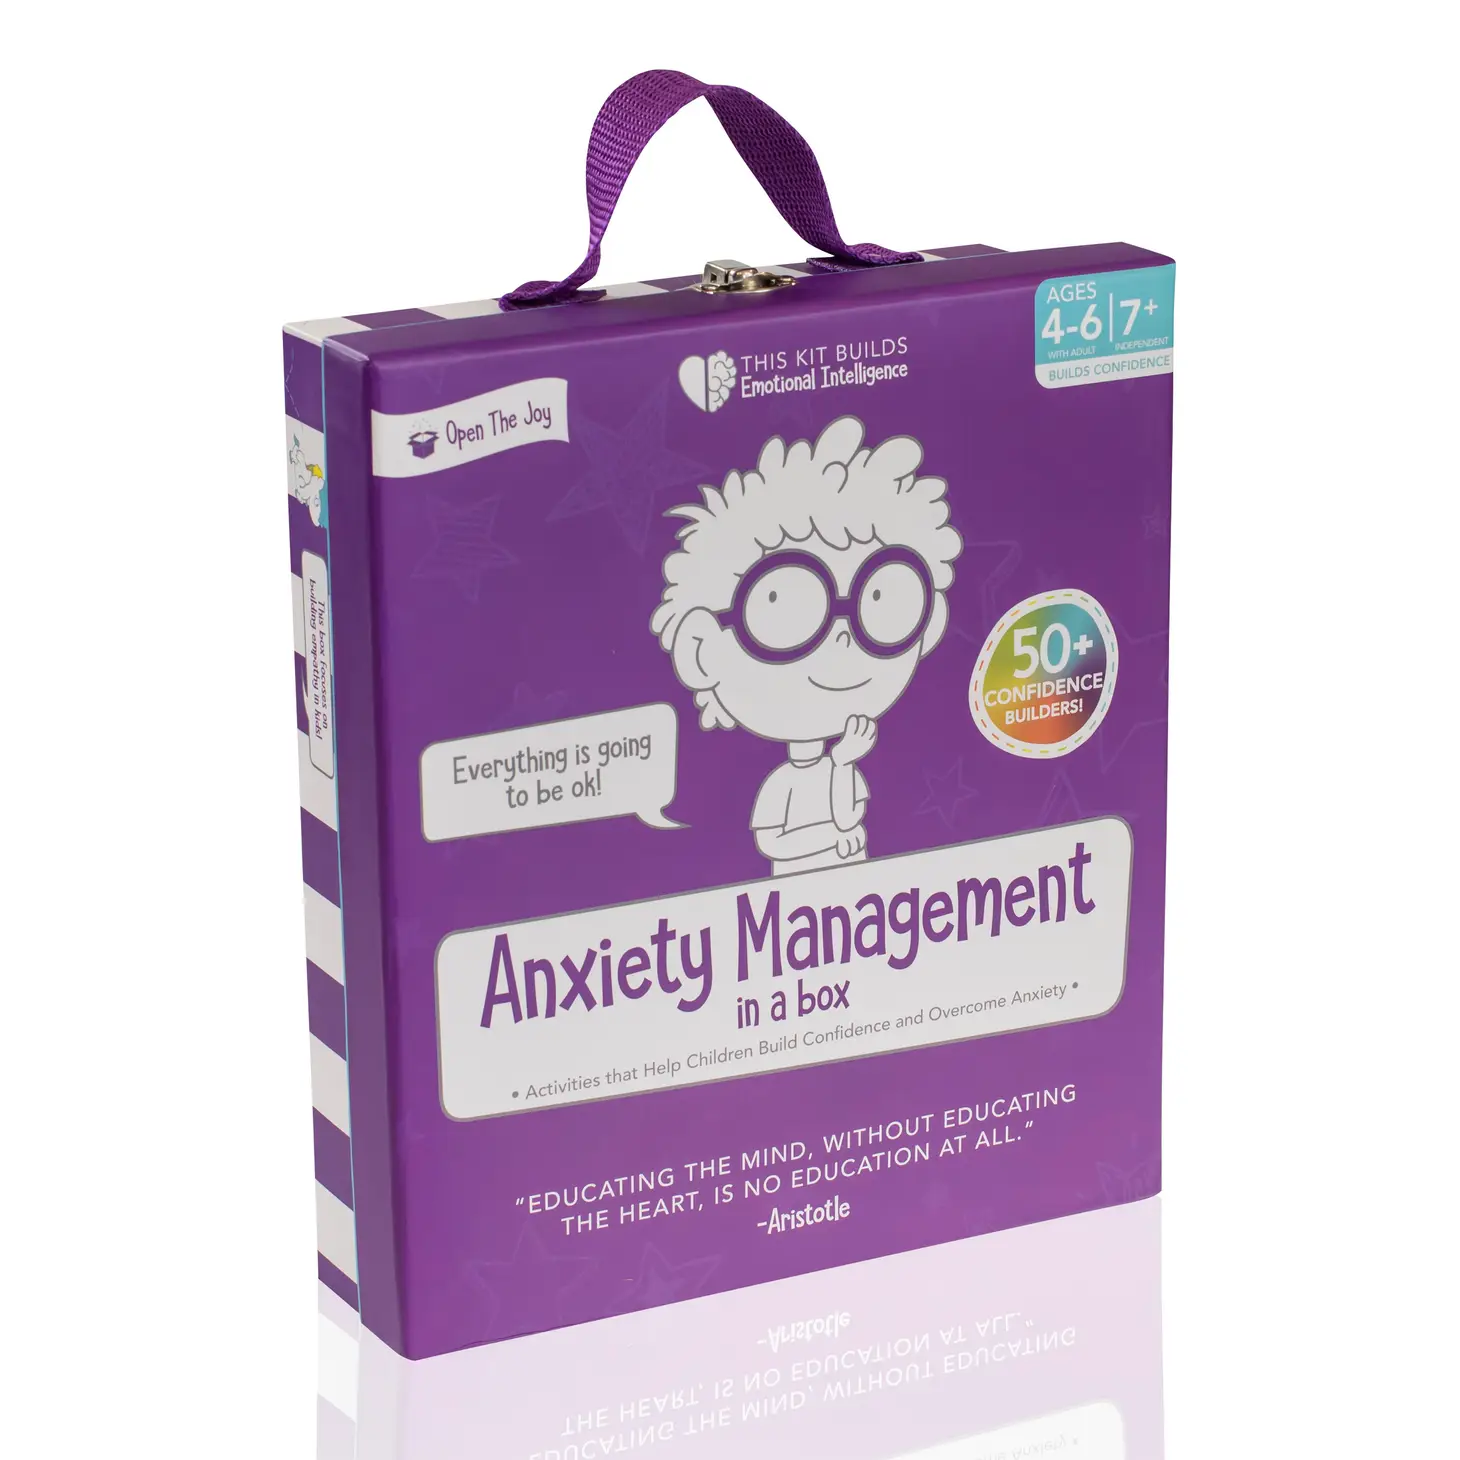 The Anxiety Management Box